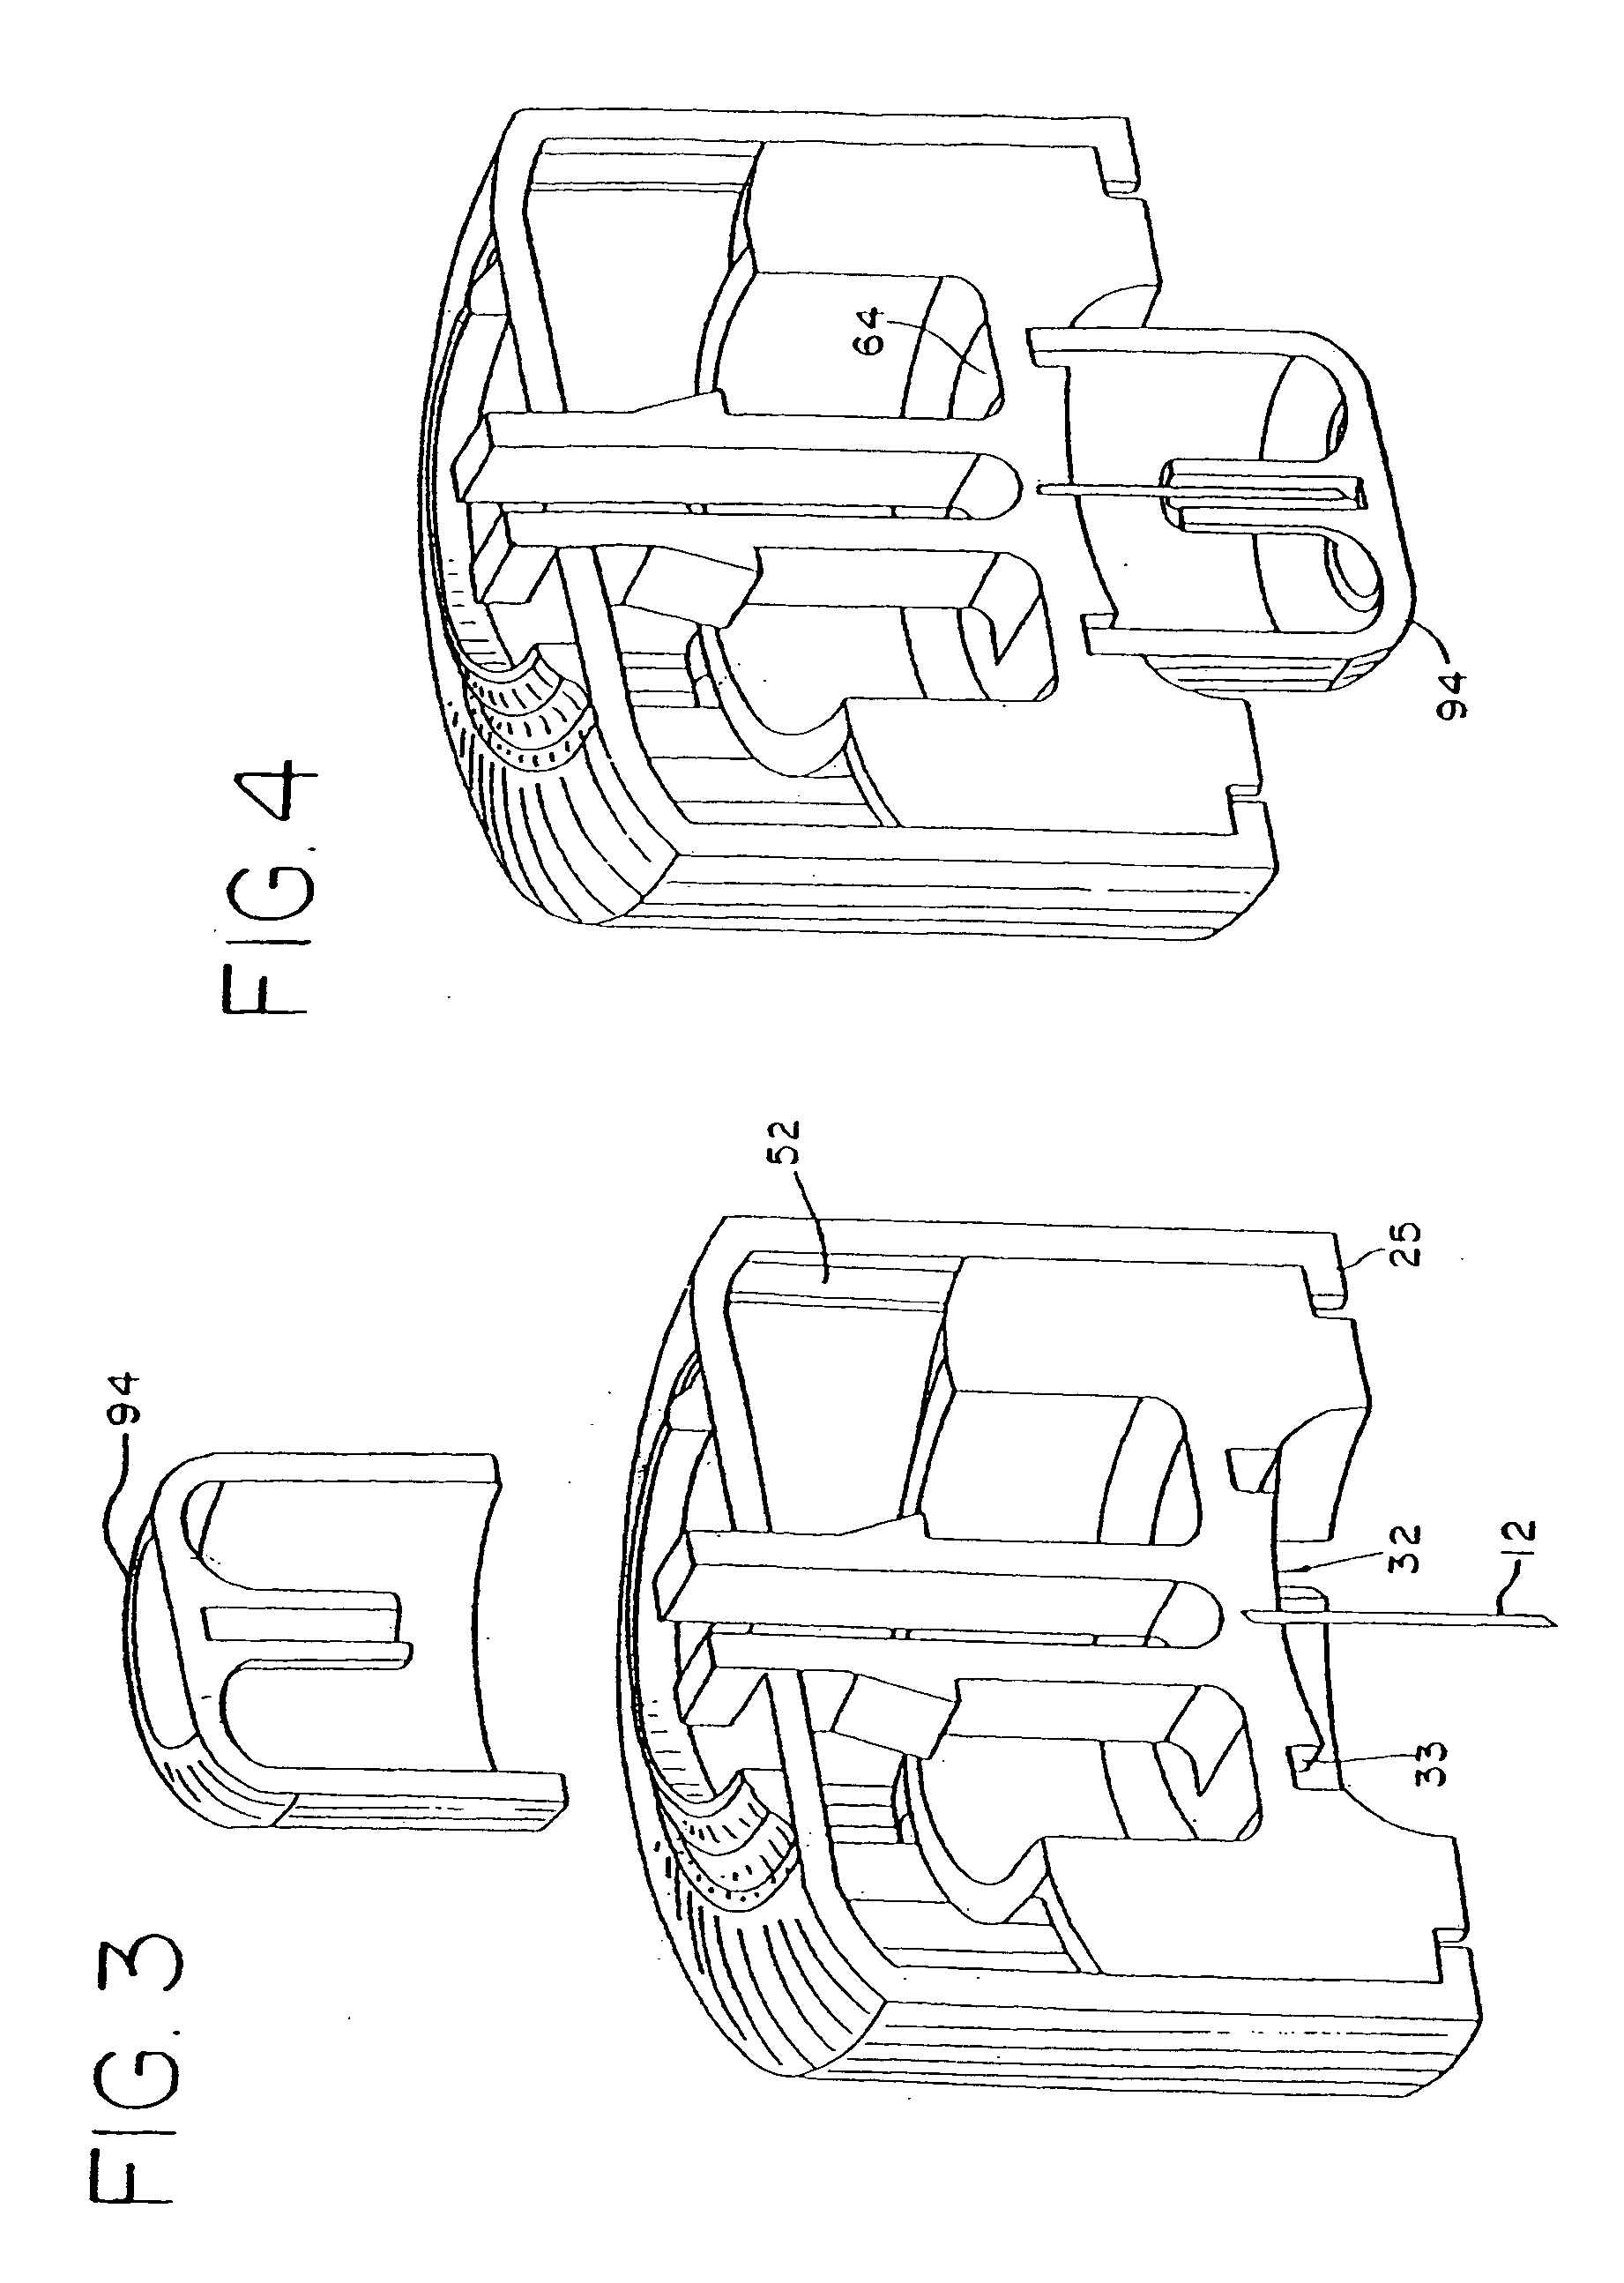 Injector device for placing a subcutaneous infusion set